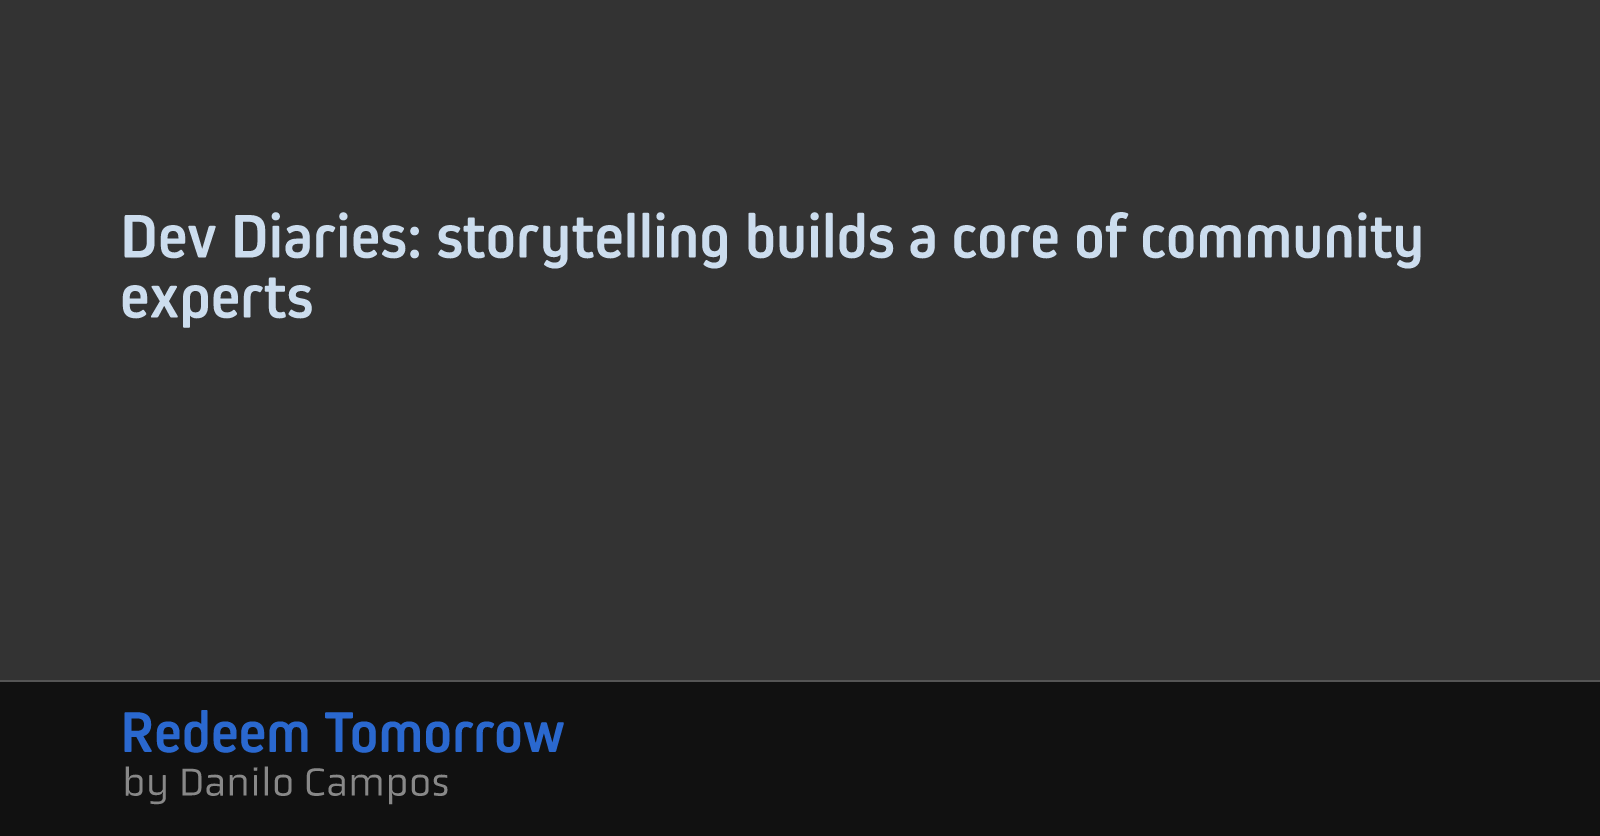 Dev Diaries: storytelling builds a core of community experts